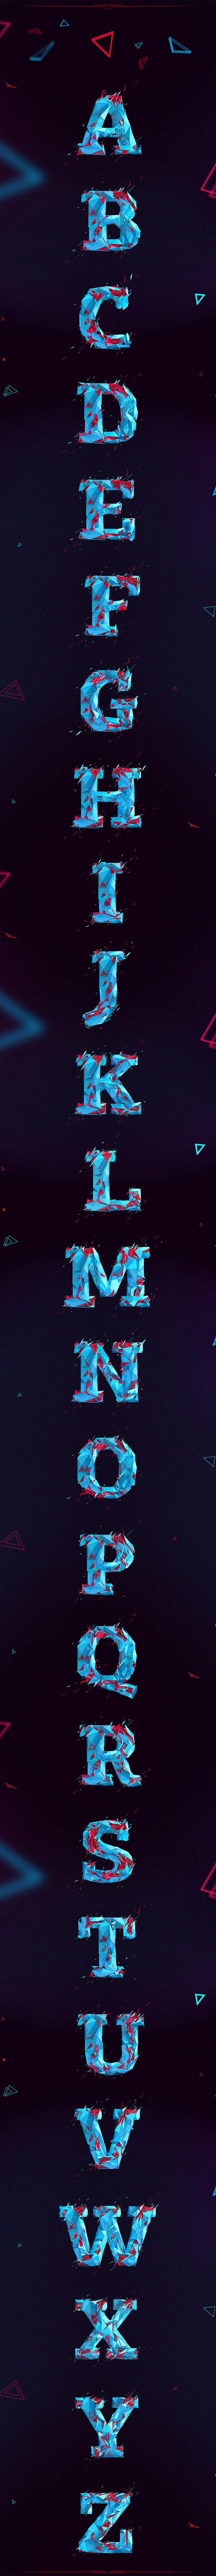 Low poly typography ...